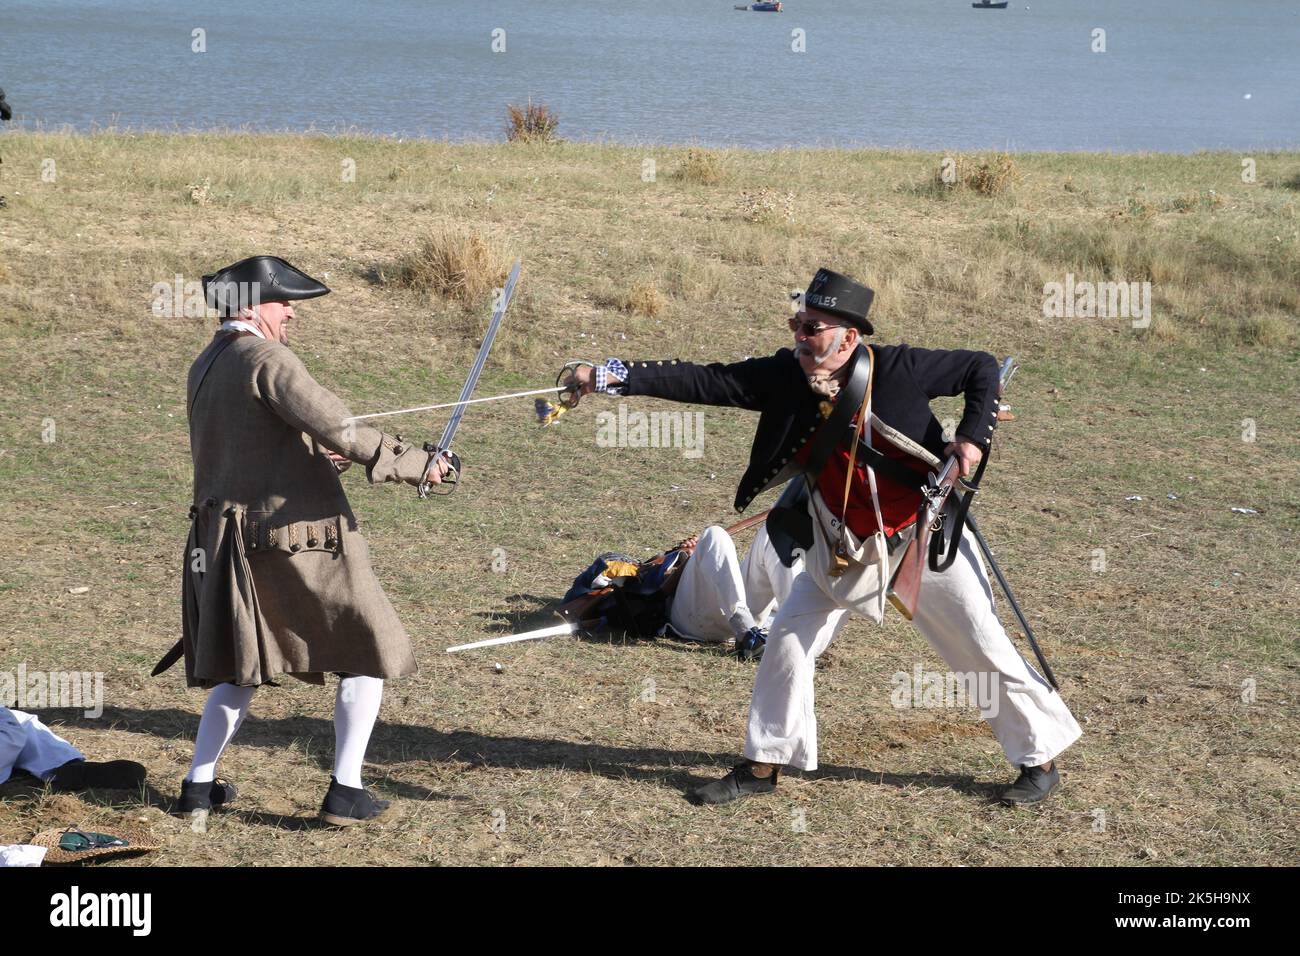 Harwich, UK. 08th Oct 2022. The 17th Harwich International Shanty Festival is taking place this weekend. The festival celebrates Harwich's maritime past with performers coming from overseas to attend. The festival also features reenactments of battles and skirmishes on the beach. Credit: Eastern Views/Alamy Live News Stock Photo